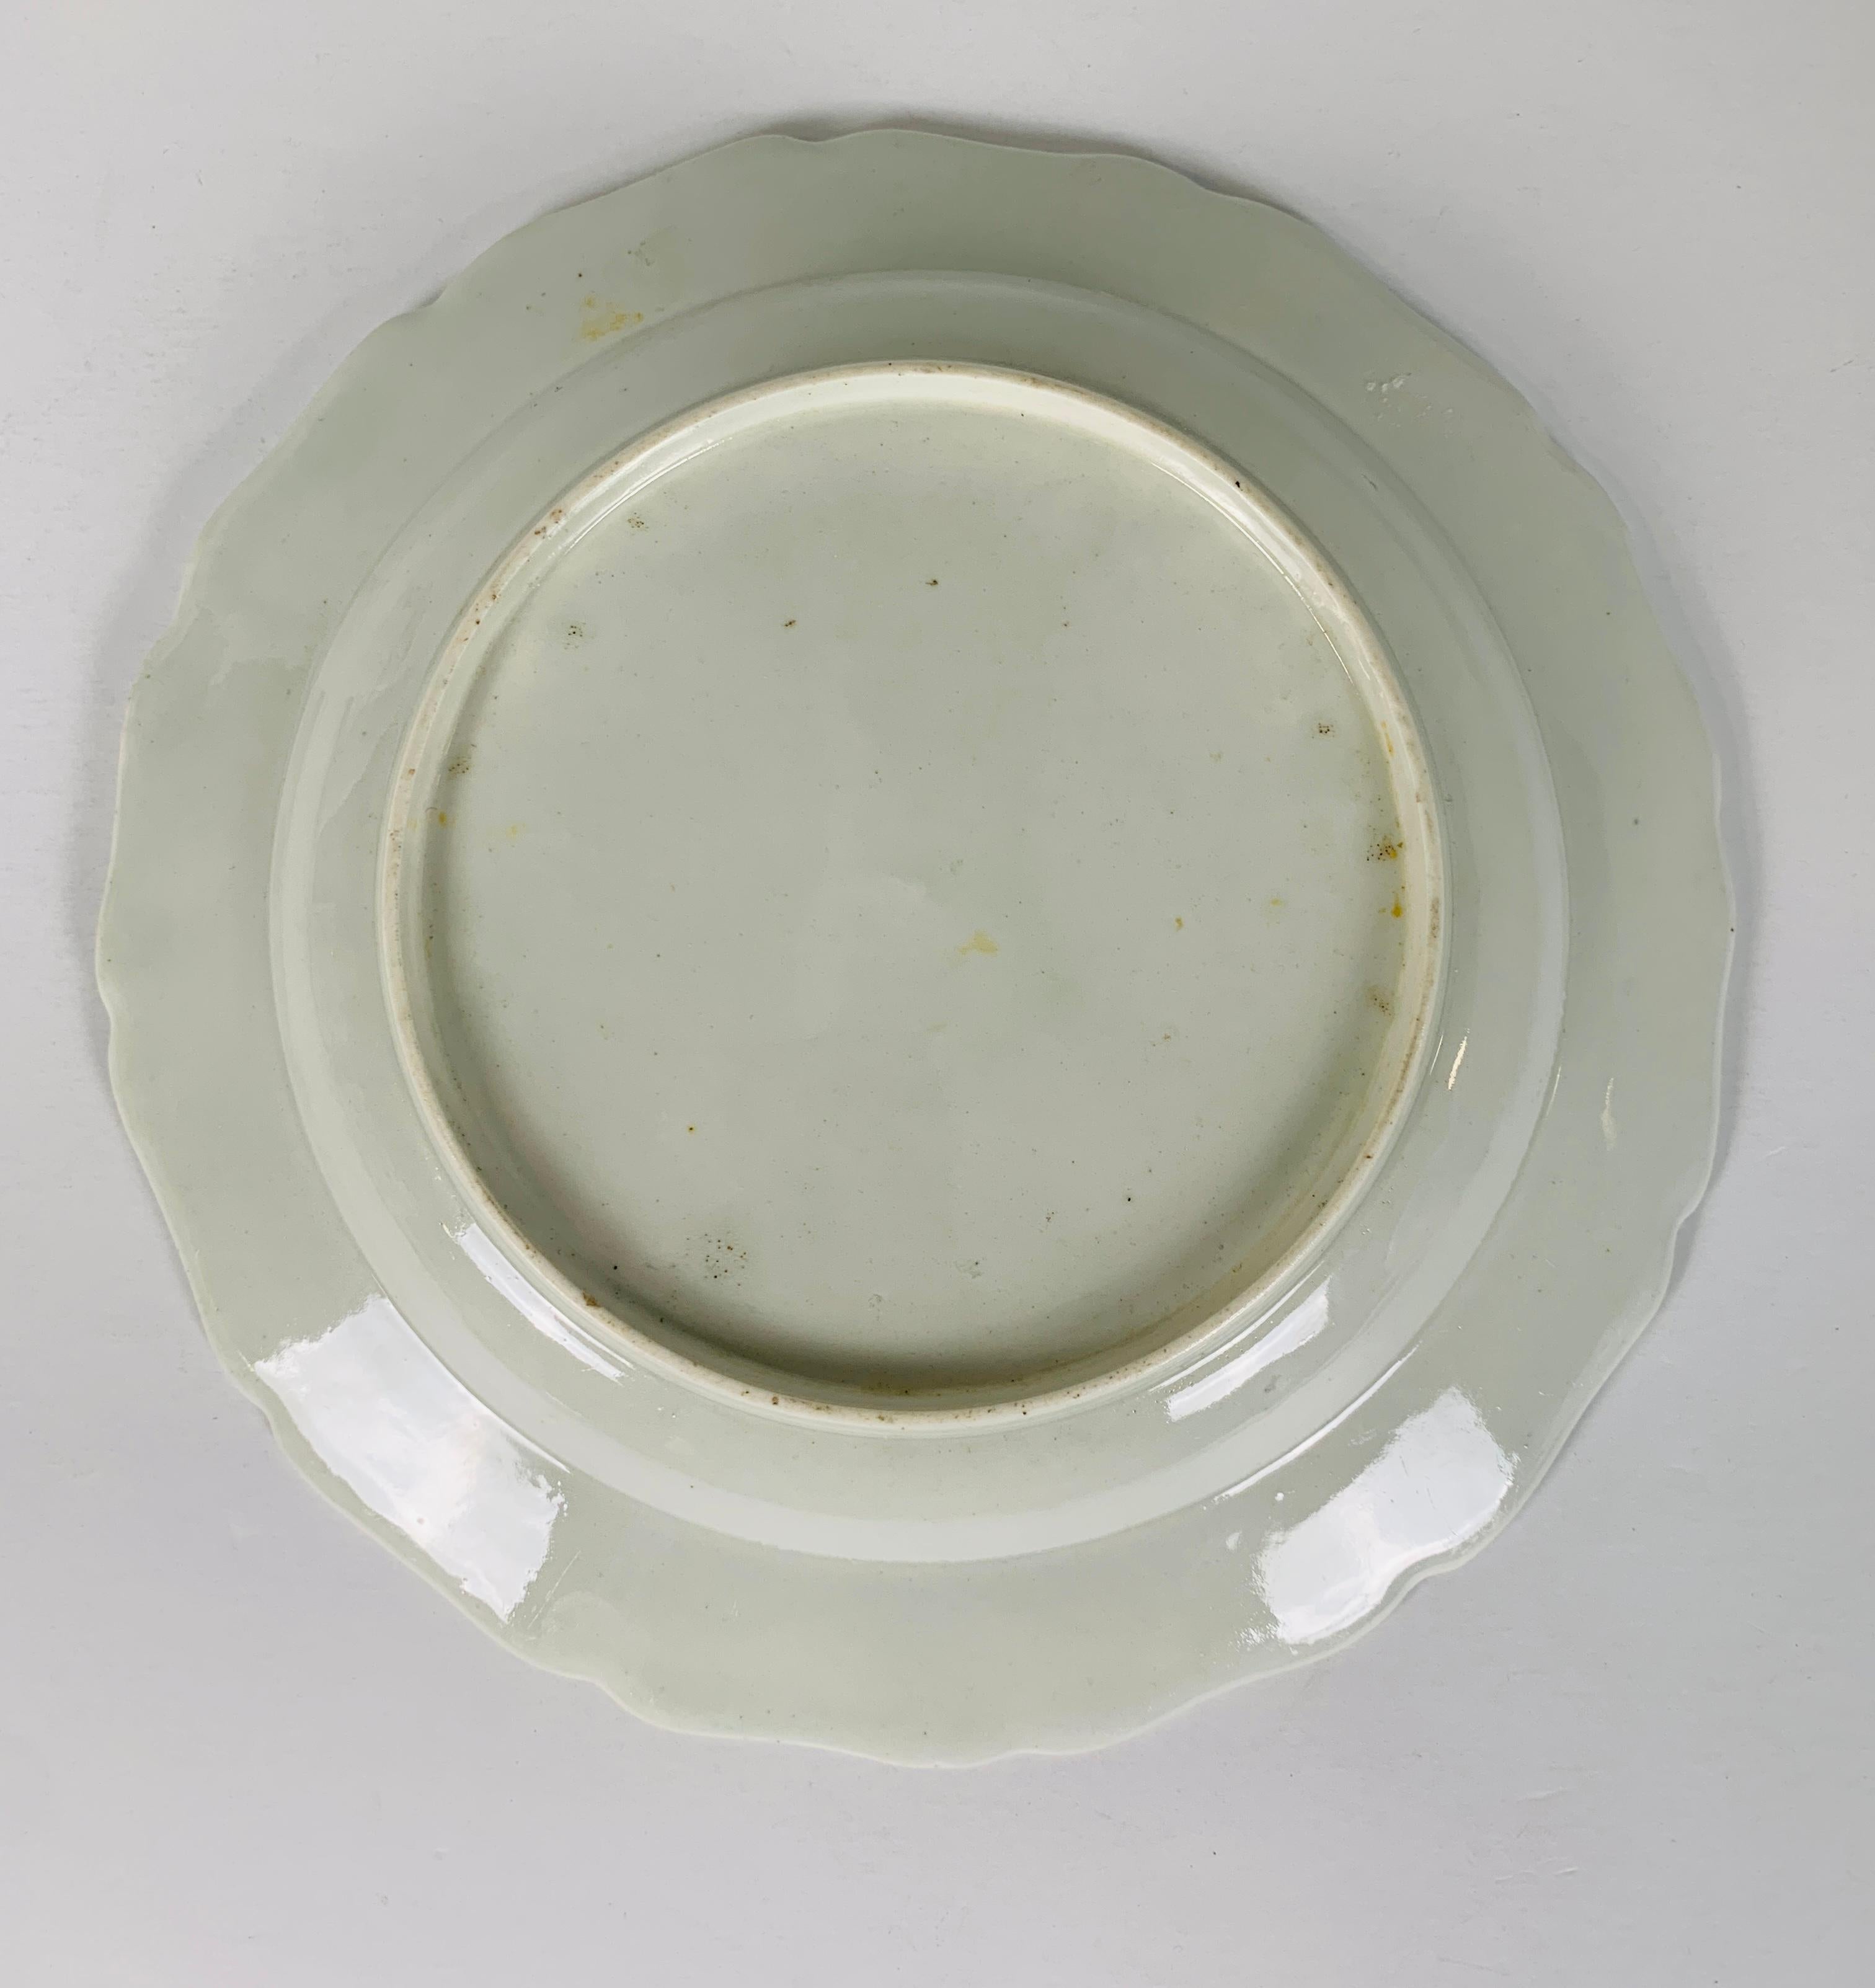 Porcelain First Period Worcester Dish 18th Century Showing Scholars in Ancient Ruins